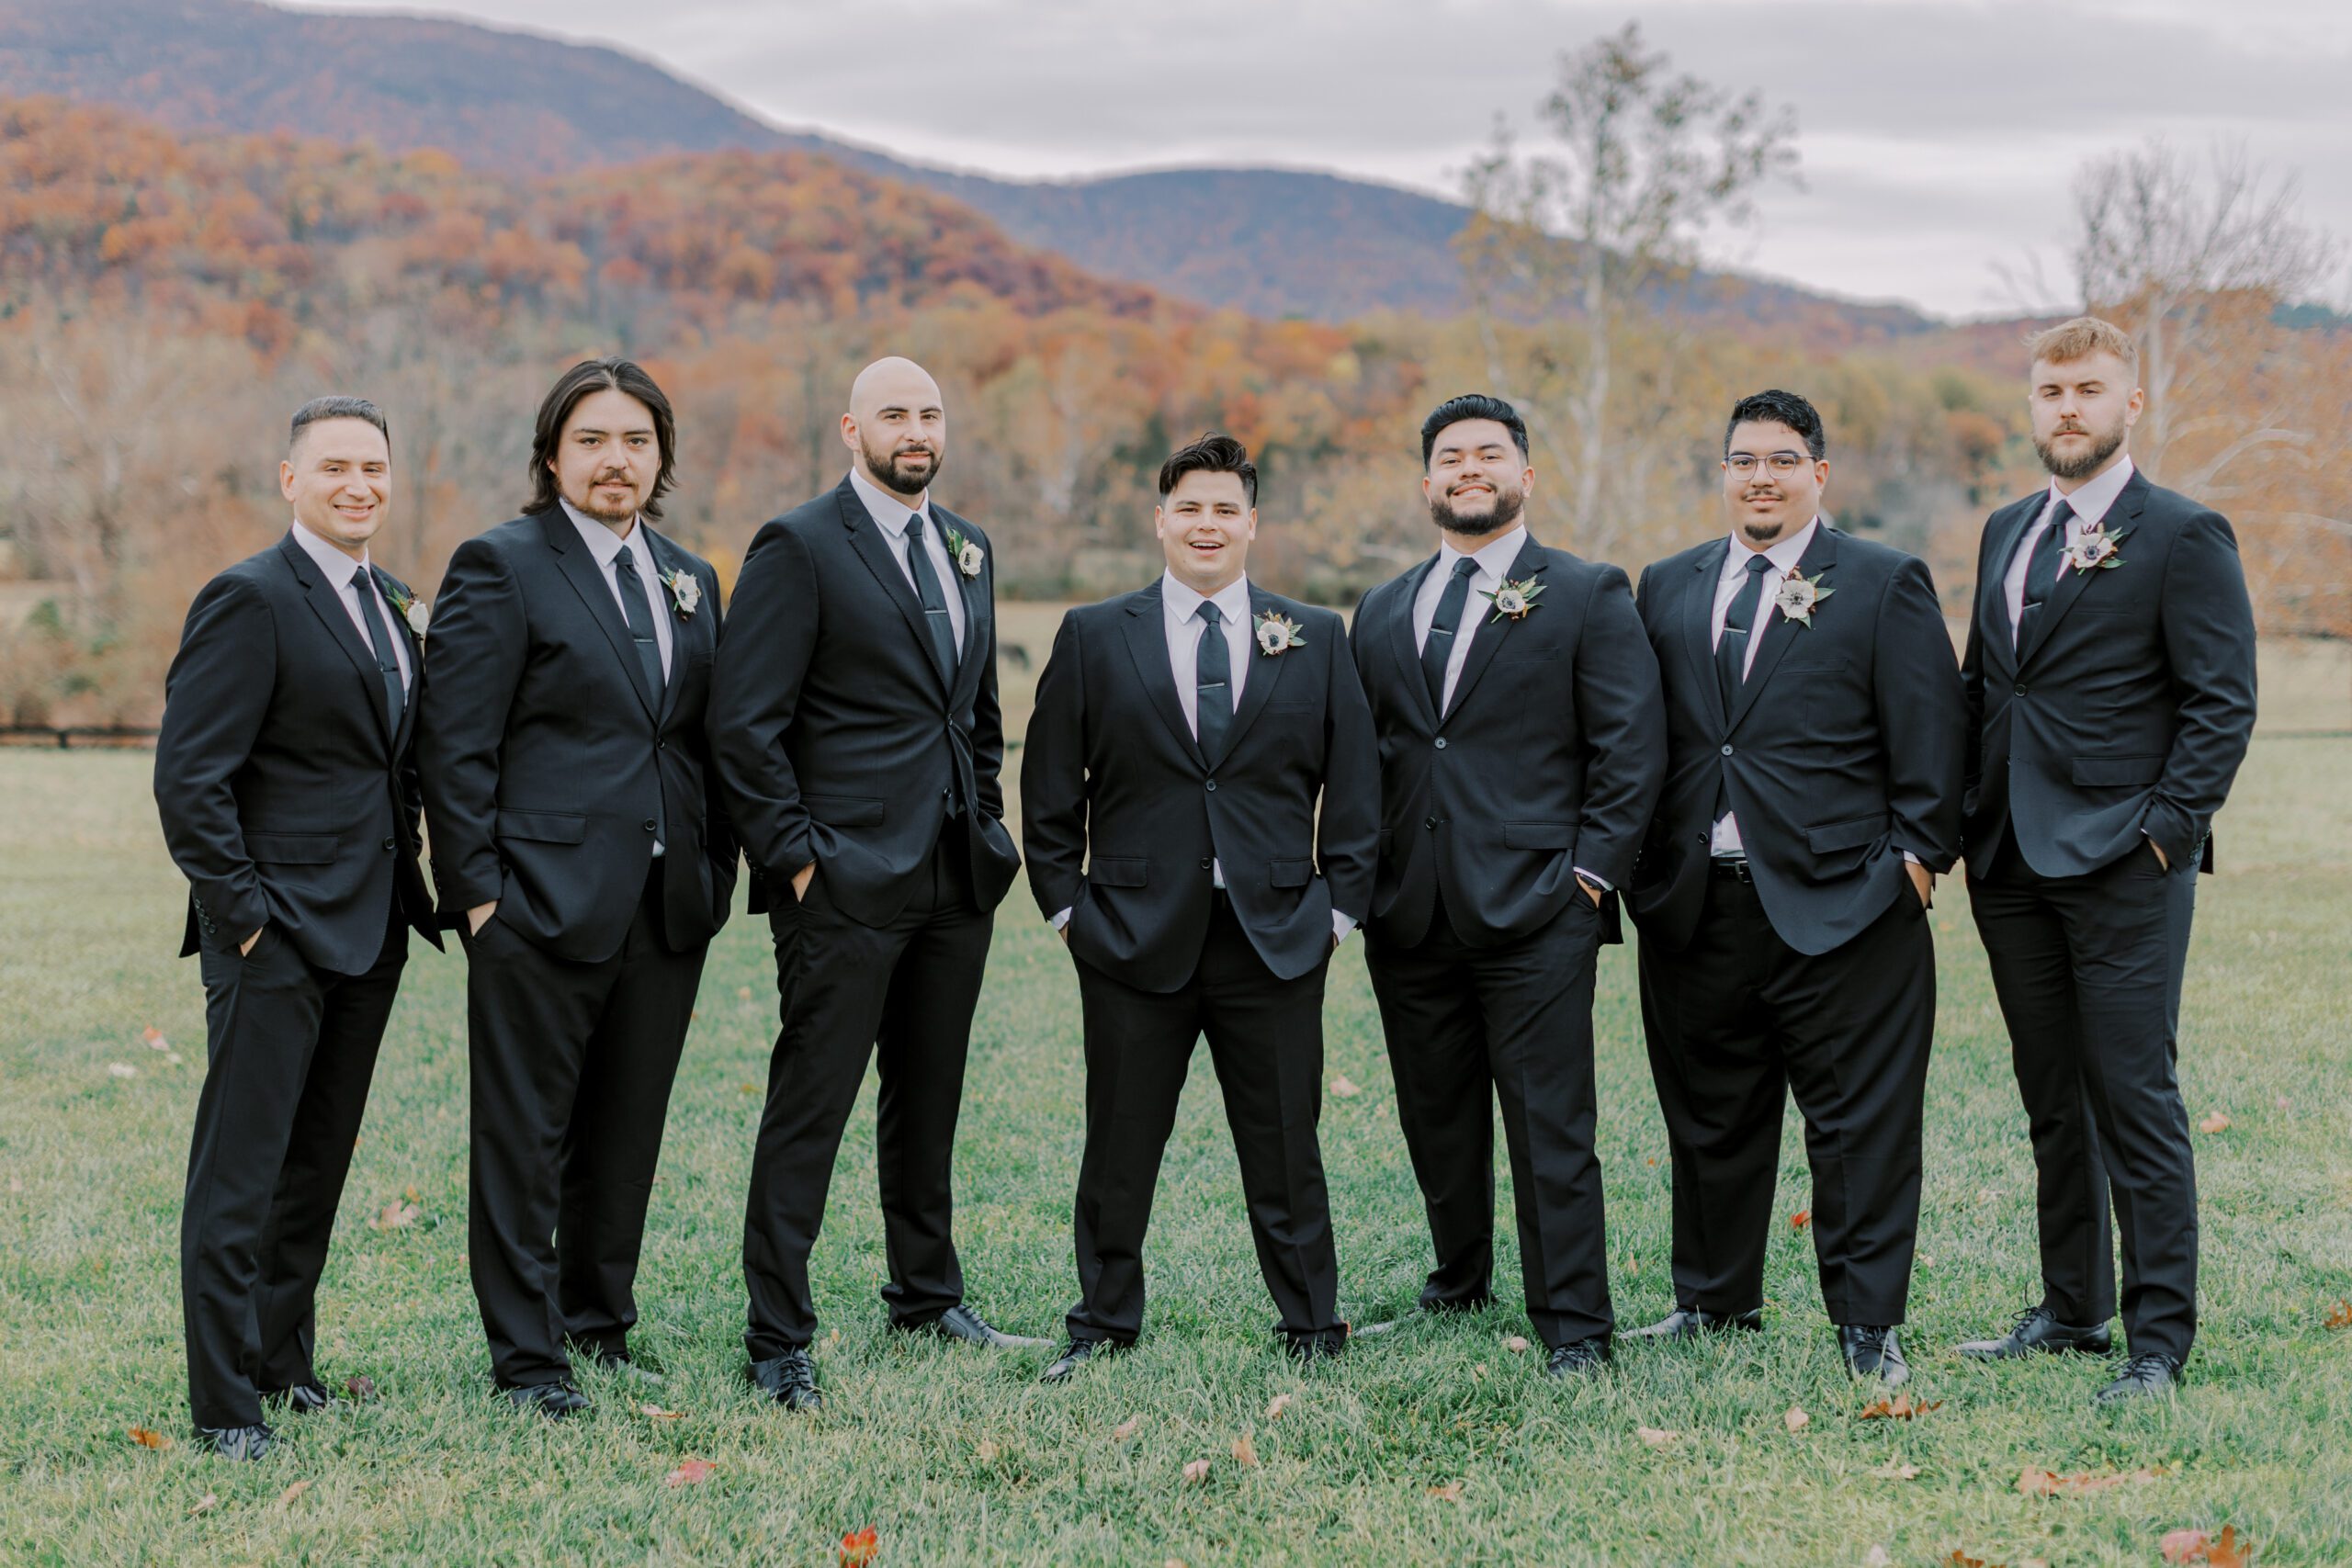 Image of groom and his groomsmen standing outside with fall colored scenery in background